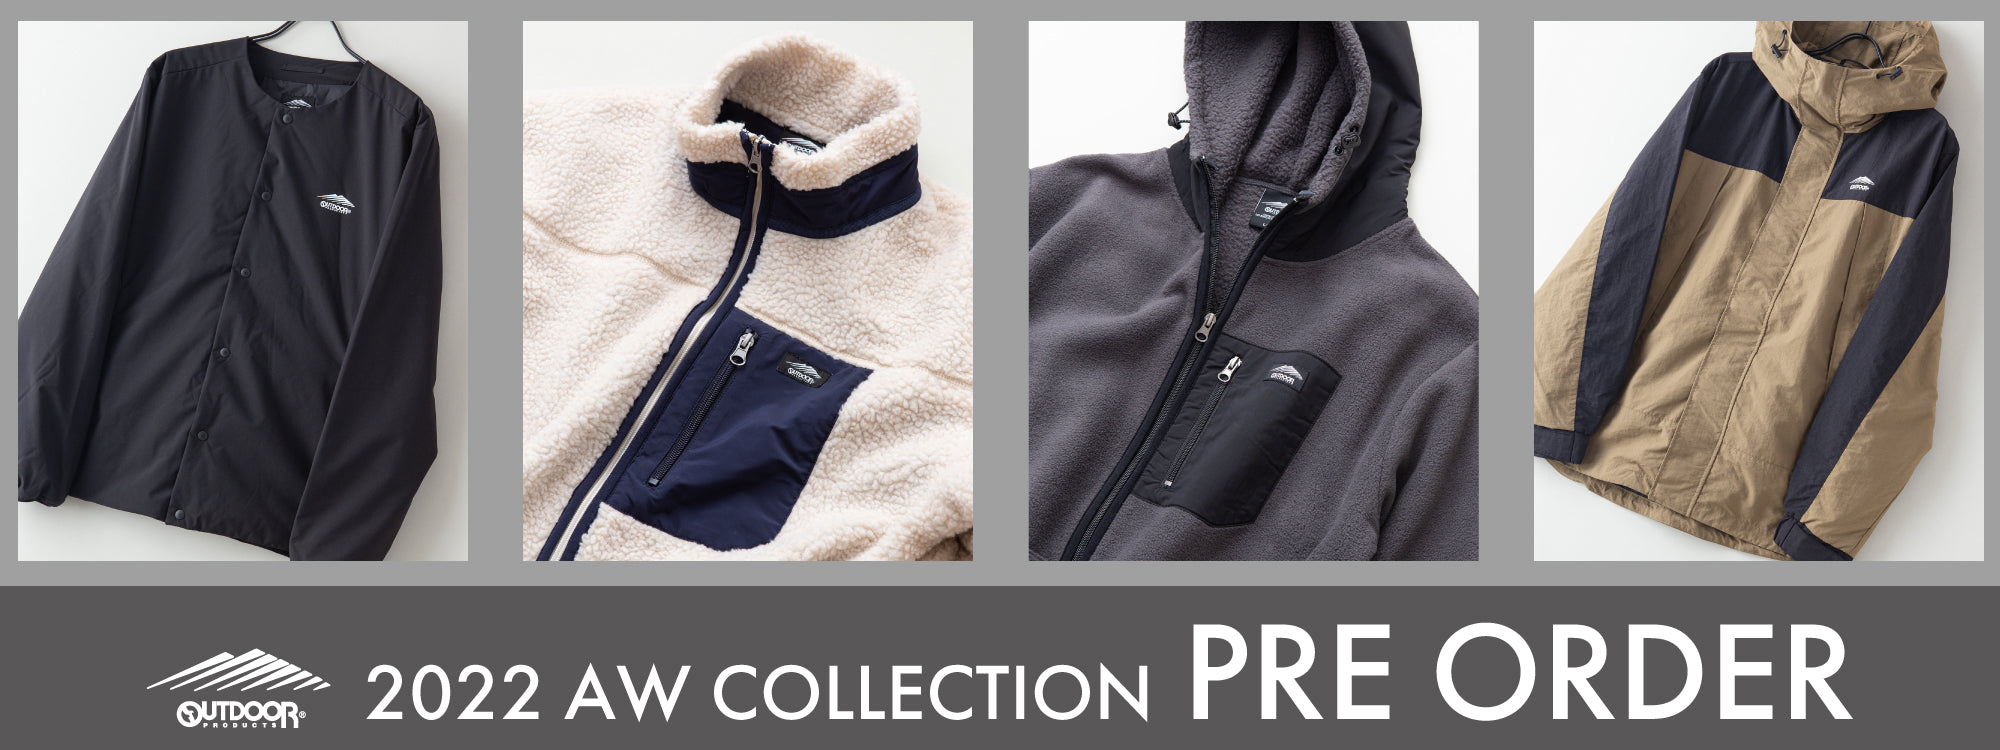 OUTDOOR PRODUCTS 2022 AW COLLECTION PRE ORDER 予約販売